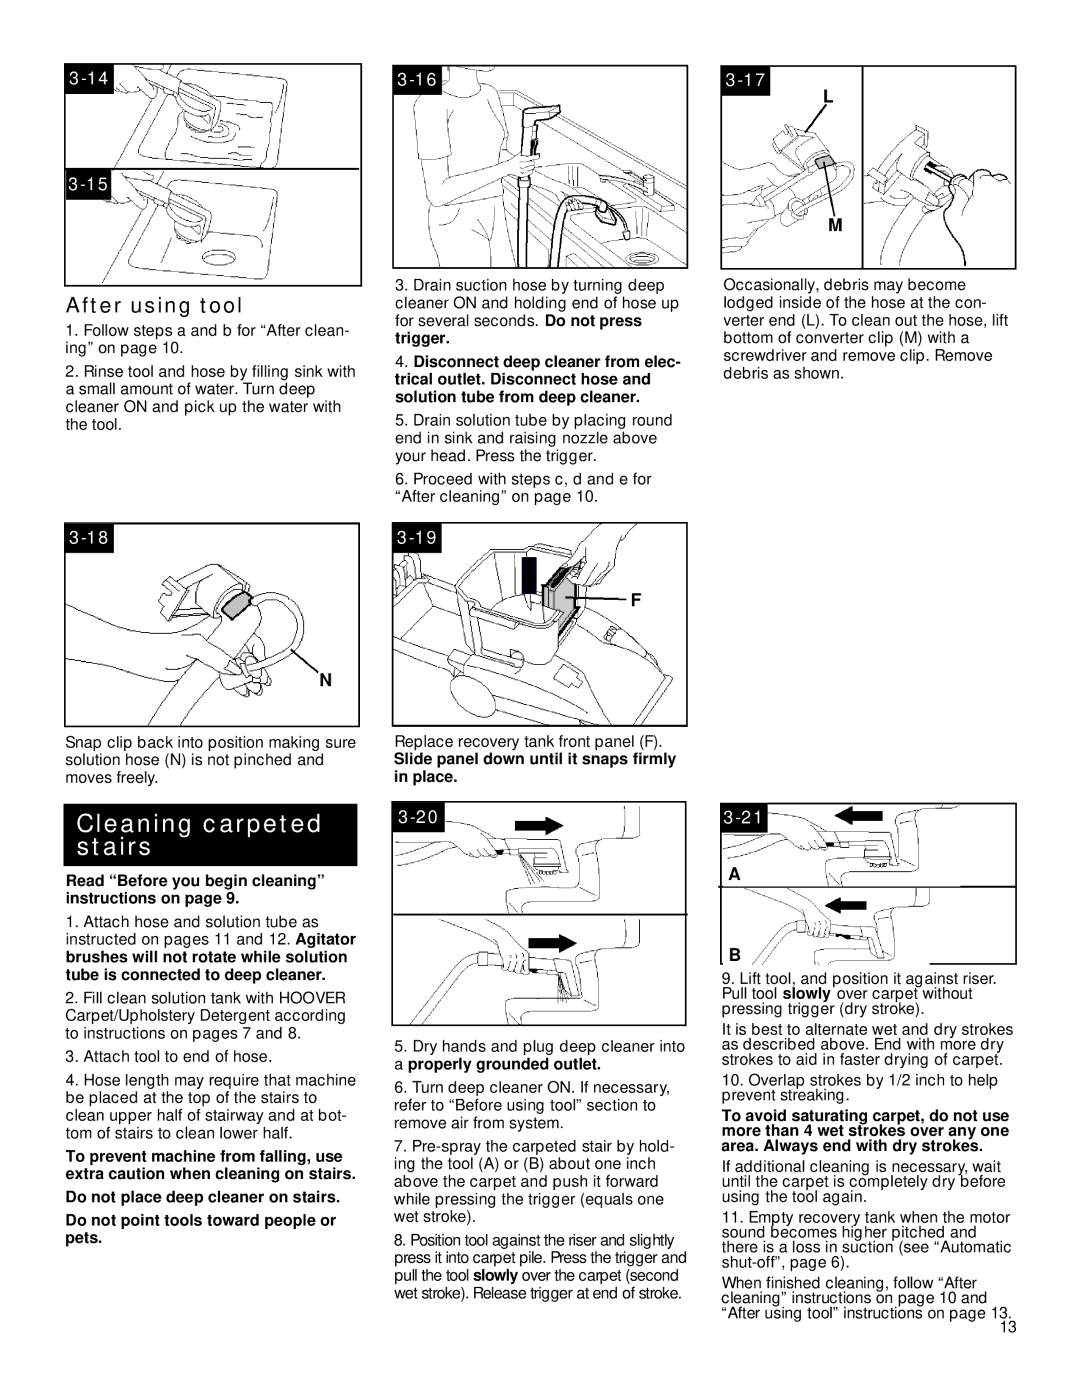 Hoover SteamVacuum owner manual After using tool, Slide panel down until it snaps firmly in place 